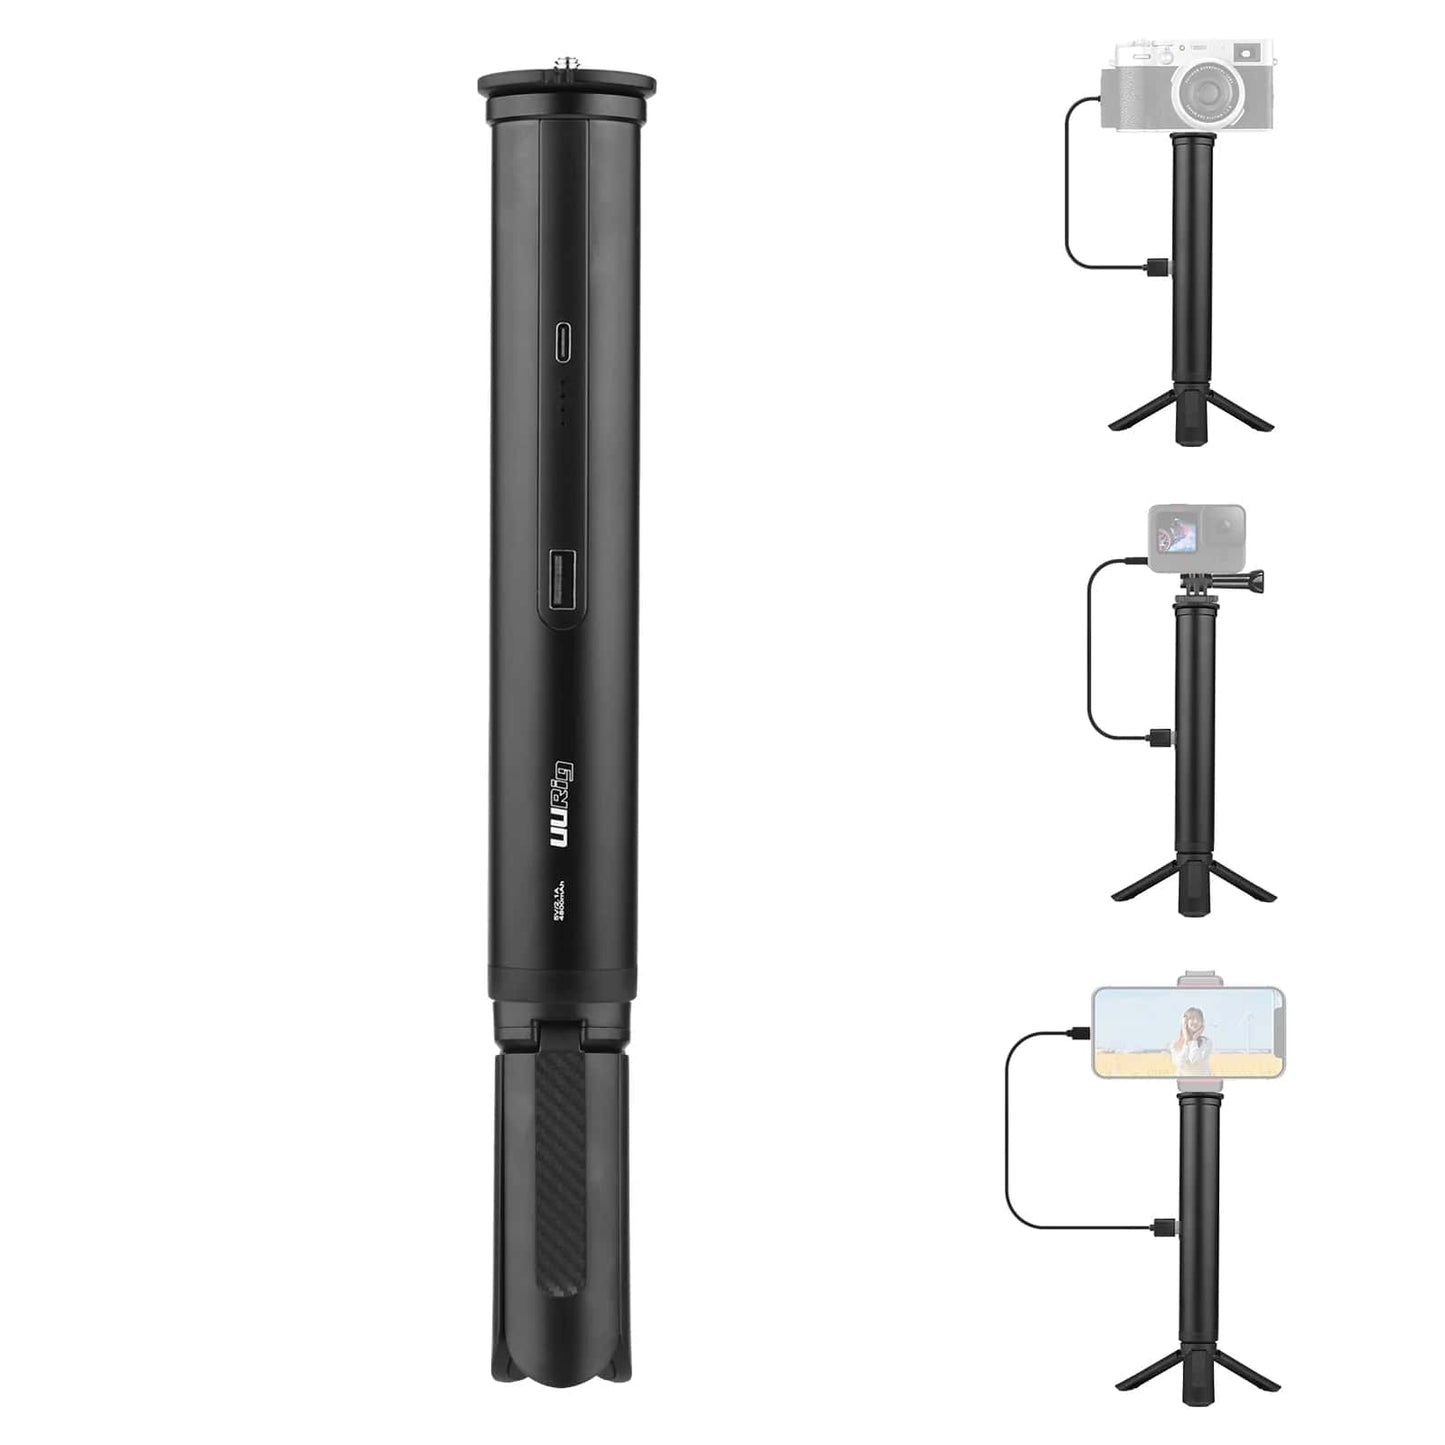 UURig by Ulanzi Selfie Stick Tripod for Cameras and Action Cams with 5V/2.1A Power Bank and GoPro Mount Adapter for Photography and Vlogging (5000mAh)